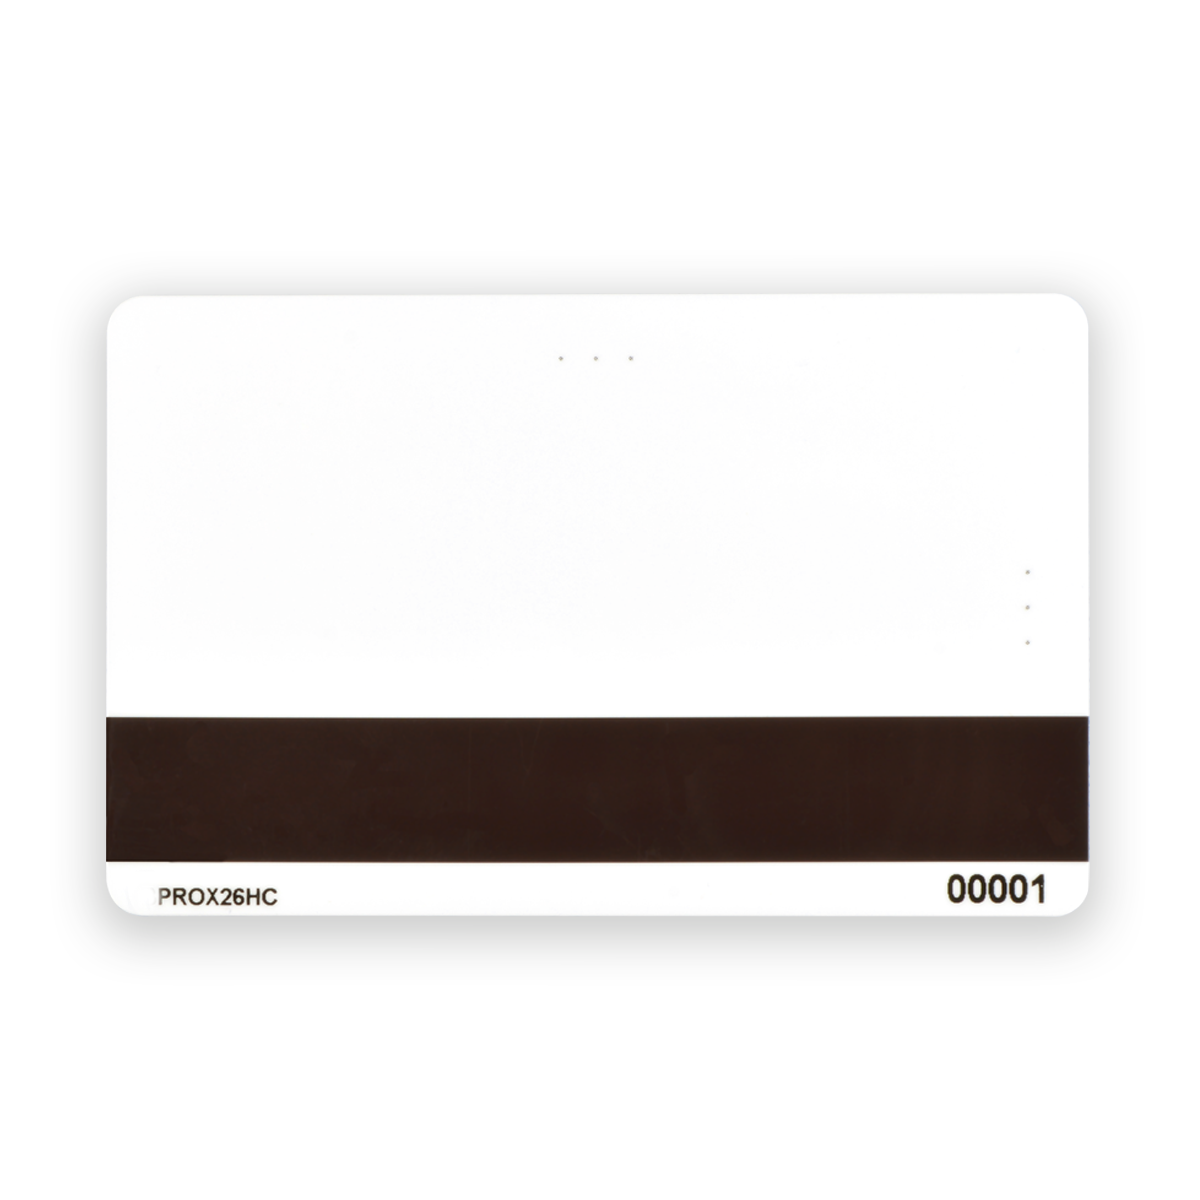 A white plastic card with a black magnetic strip and labels "PROX26HC" and "00001" printed at the bottom. This SPIDprox26HC HID Compatible Composite ISO Prox Card With HICO Magnetic Strip employs RFID technology for secure access control.